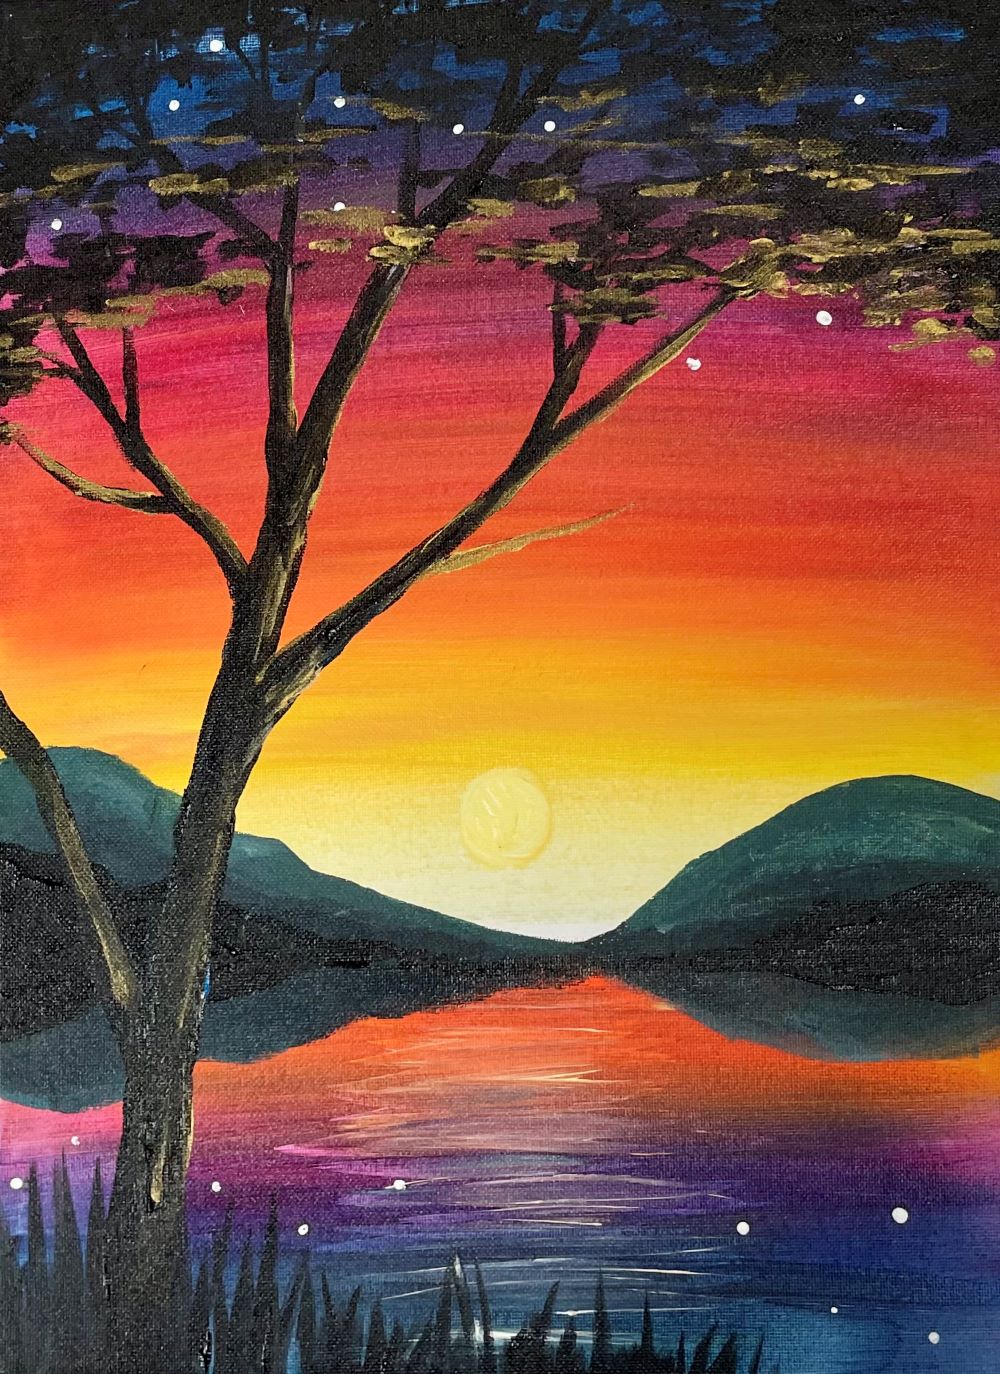 Sip & Paint Golden Sunset Tree - BYOB and Free Onsite Parking